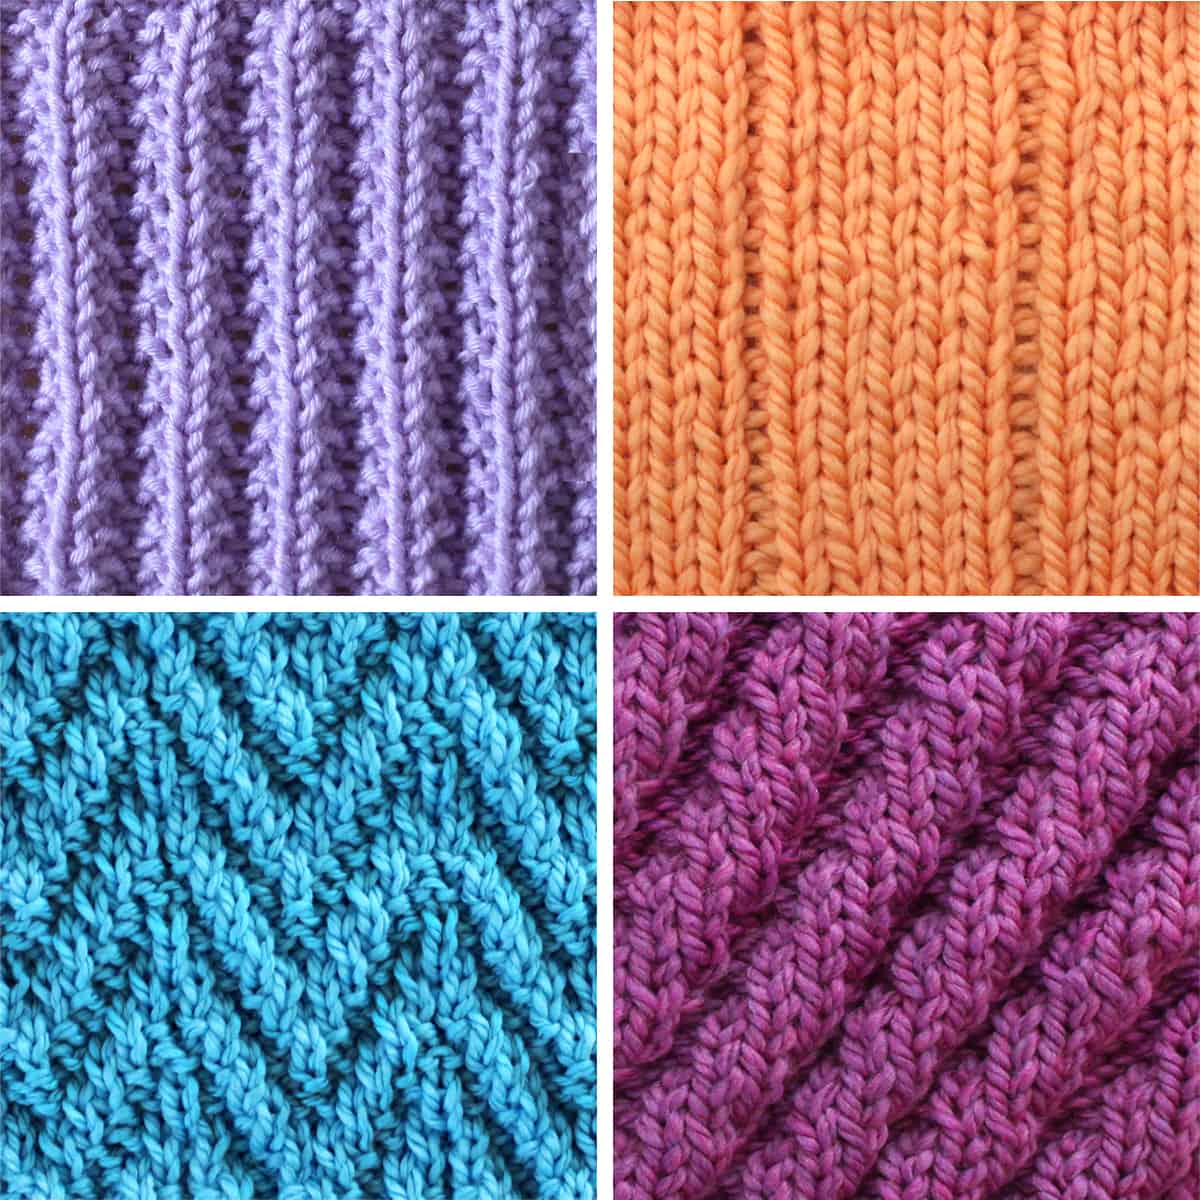 Collection of four ribbed knit stitch patterns in blue, orange, and purple yarn colors.